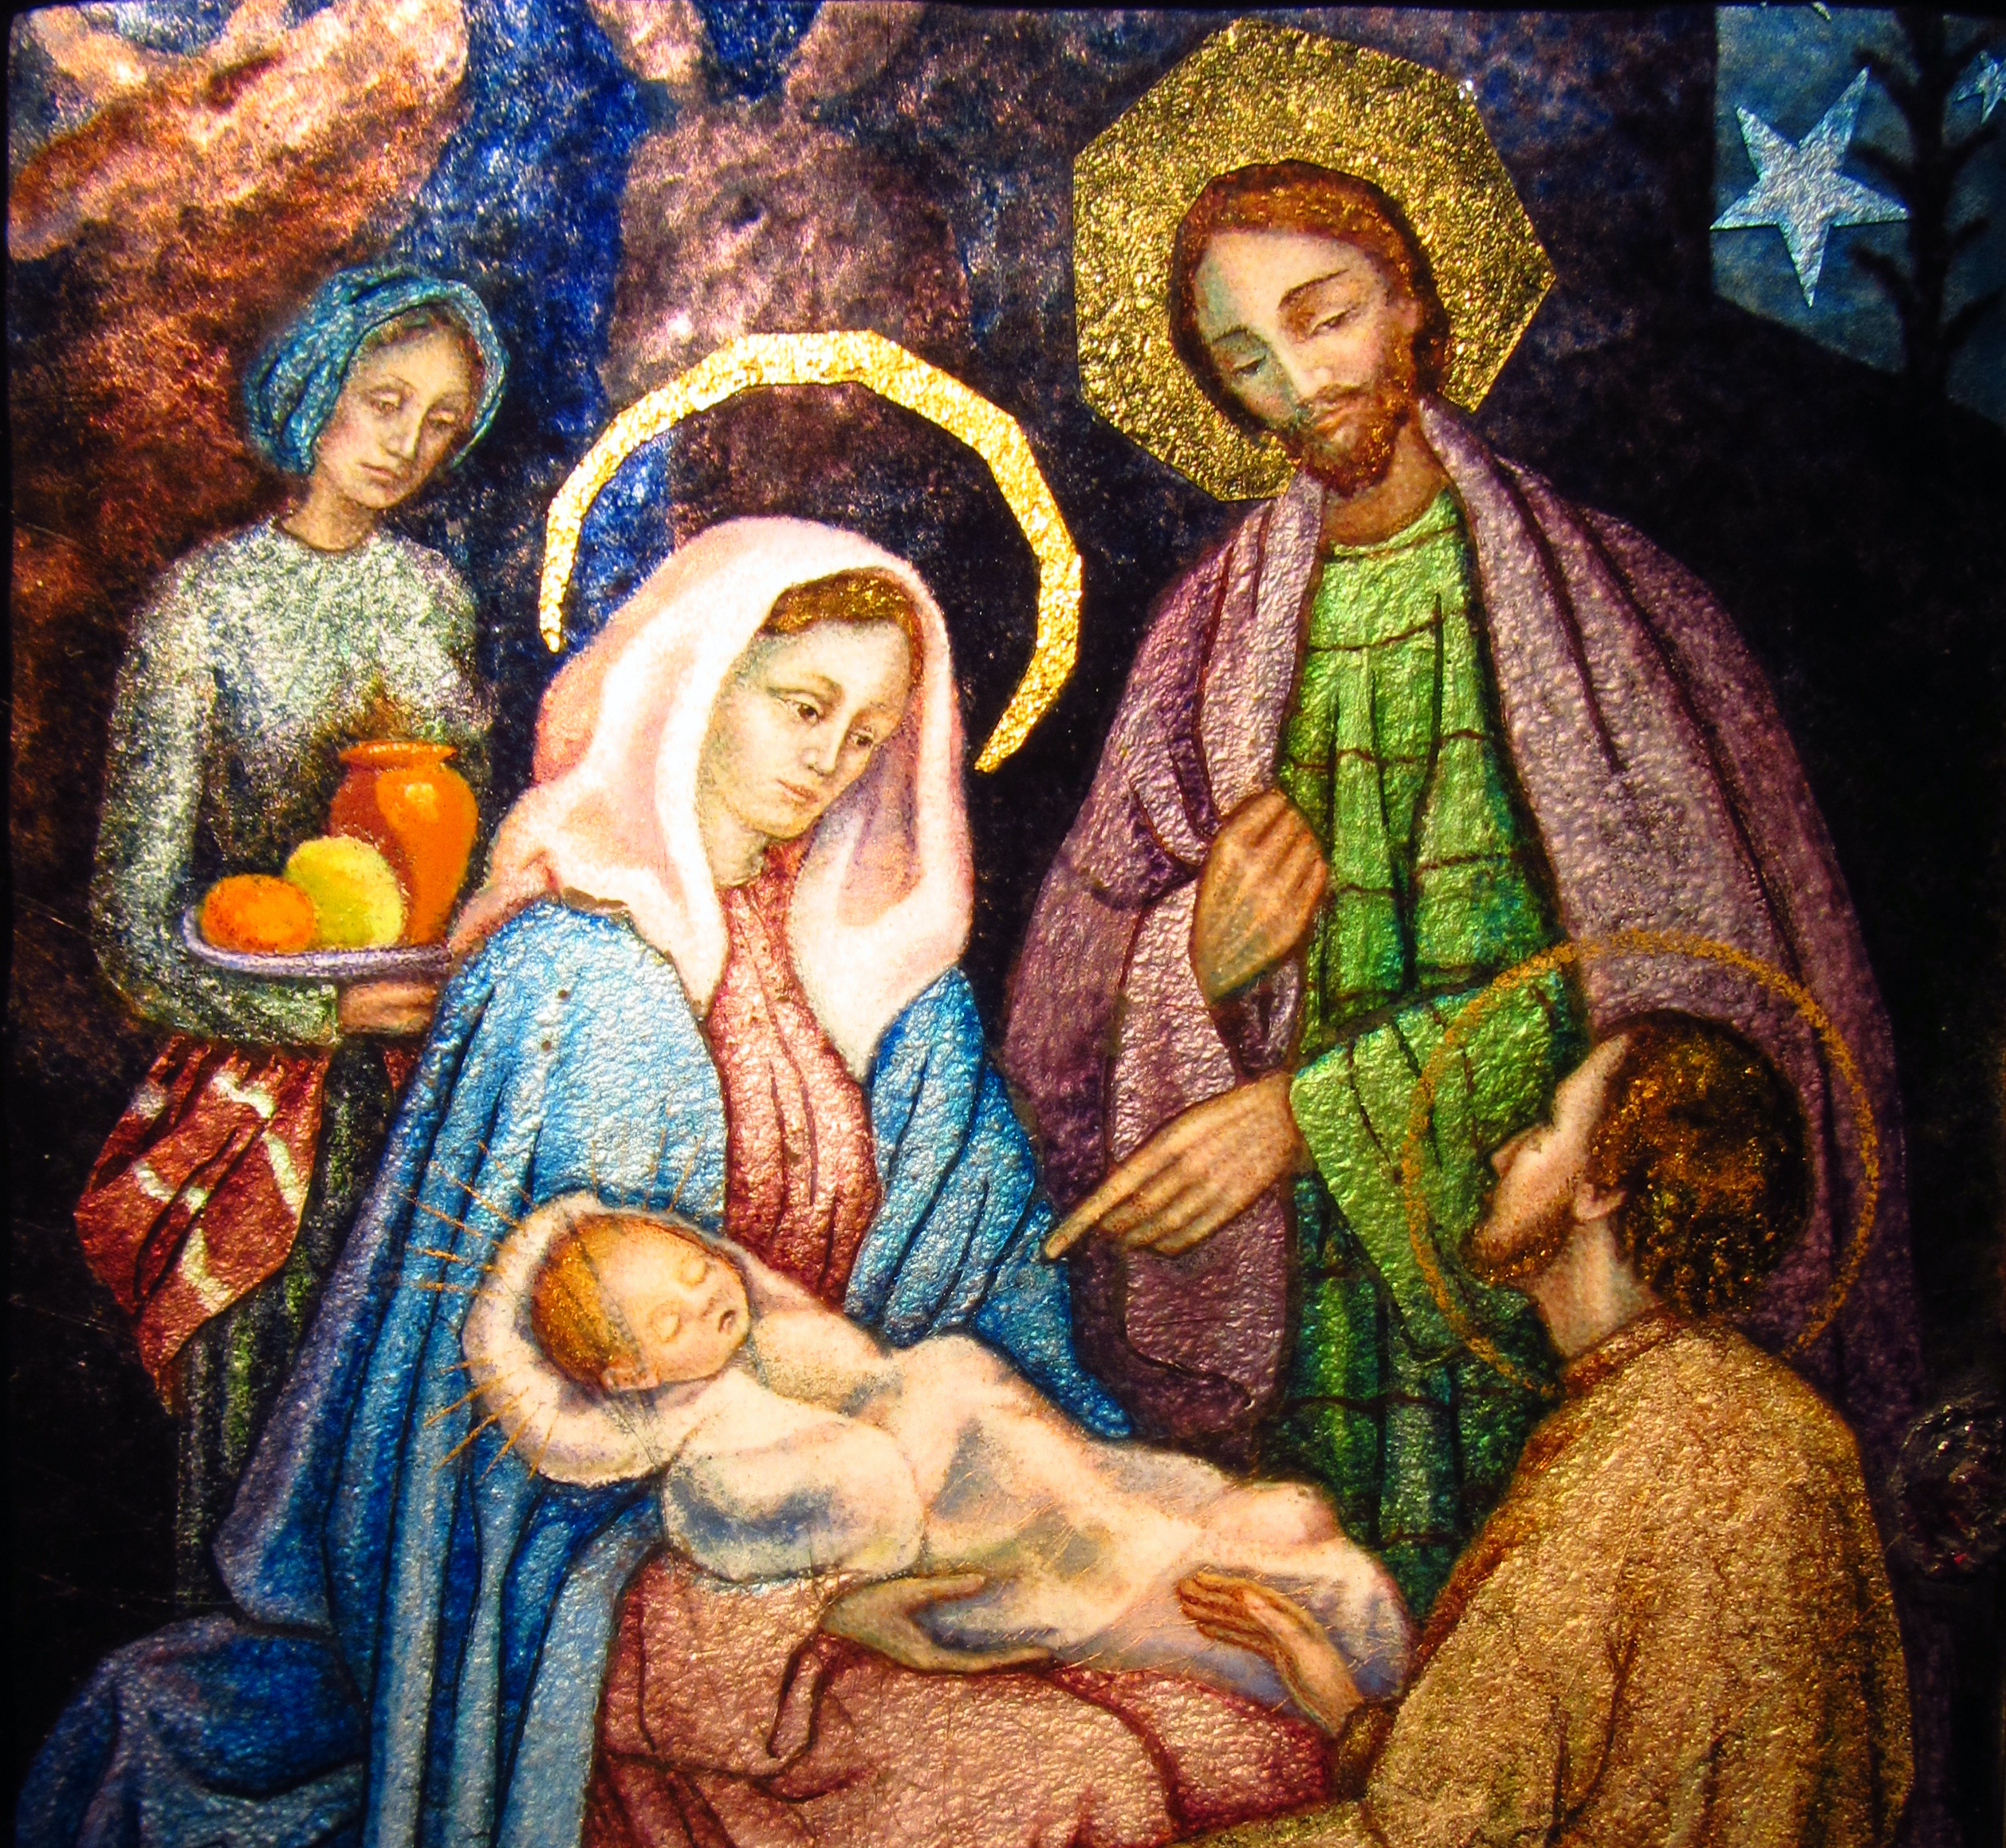 The promise of Christmas: We are not alone